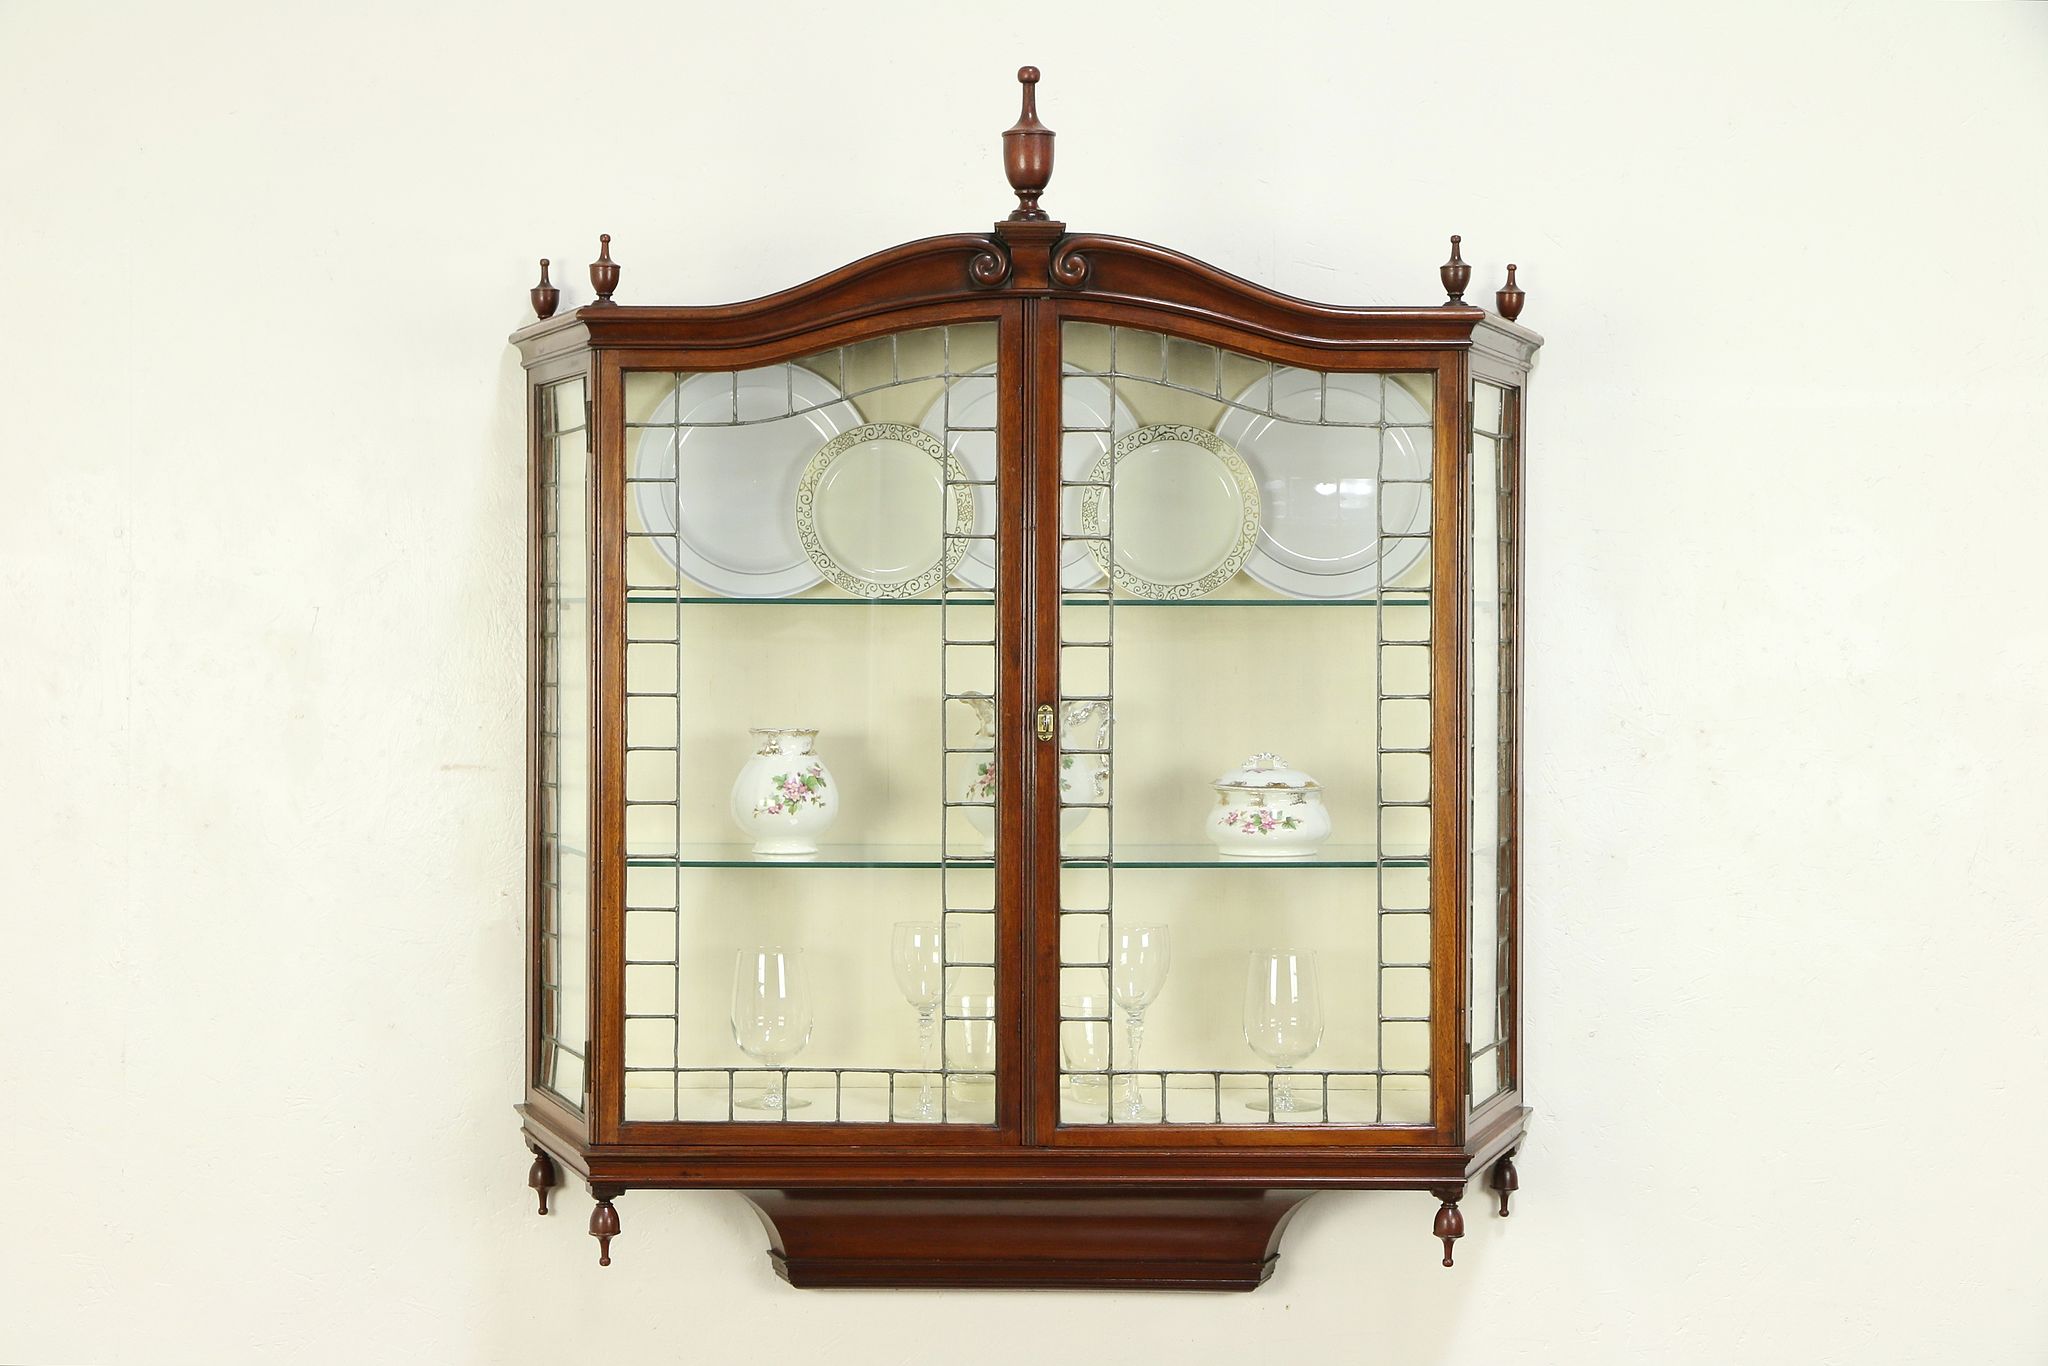 Sold English Antique Wall Hanging Vitrine Or Curio Cabinet